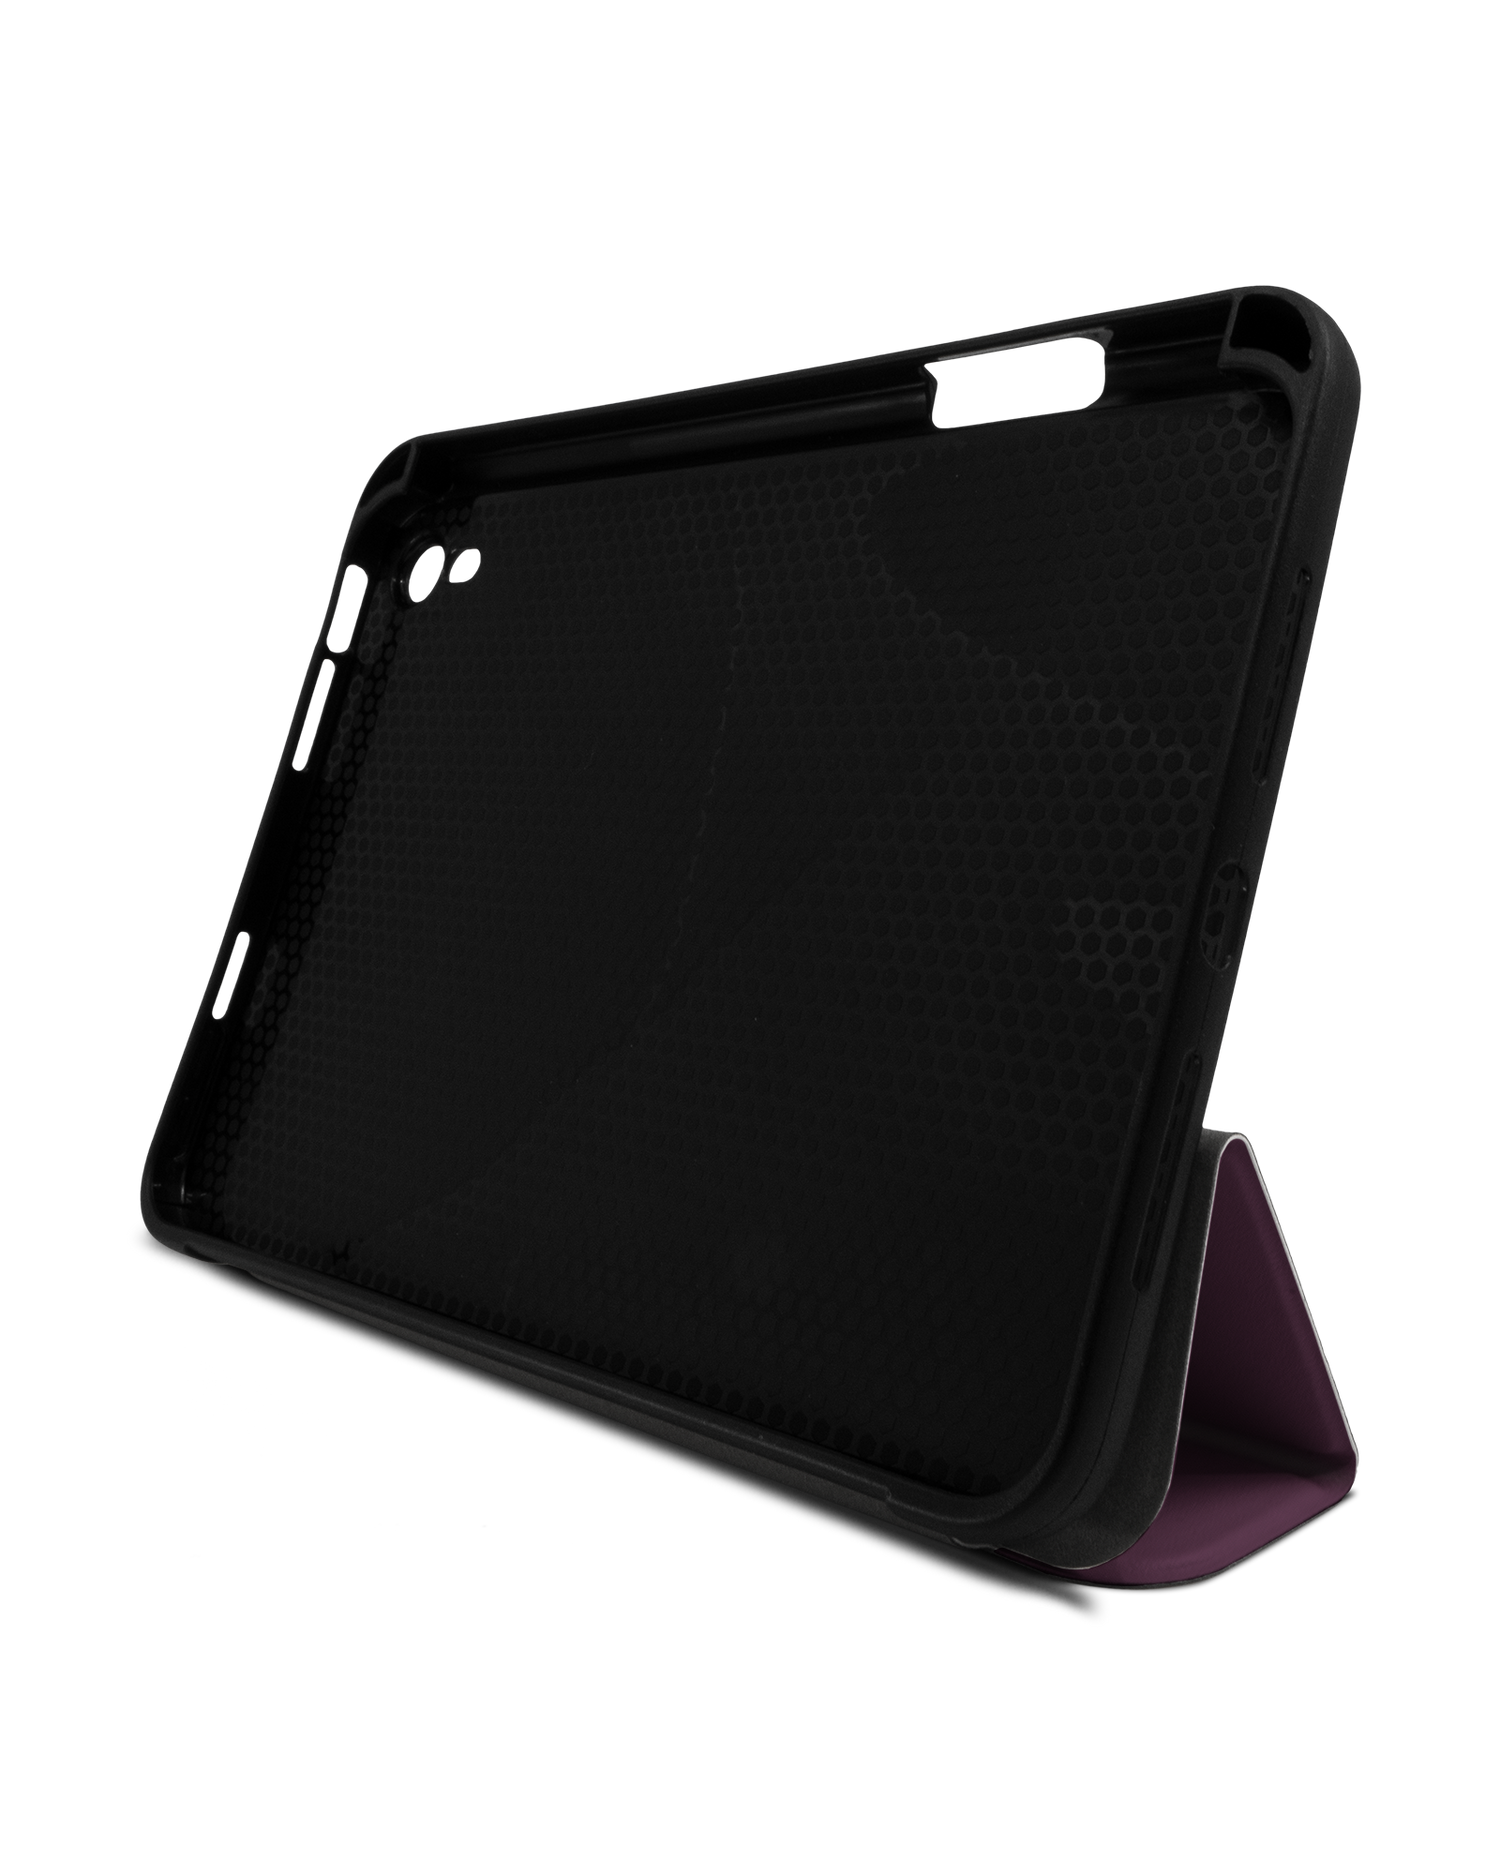 PLUM iPad Case with Pencil Holder Apple iPad mini 6 (2021): Set up in landscape format (front view)